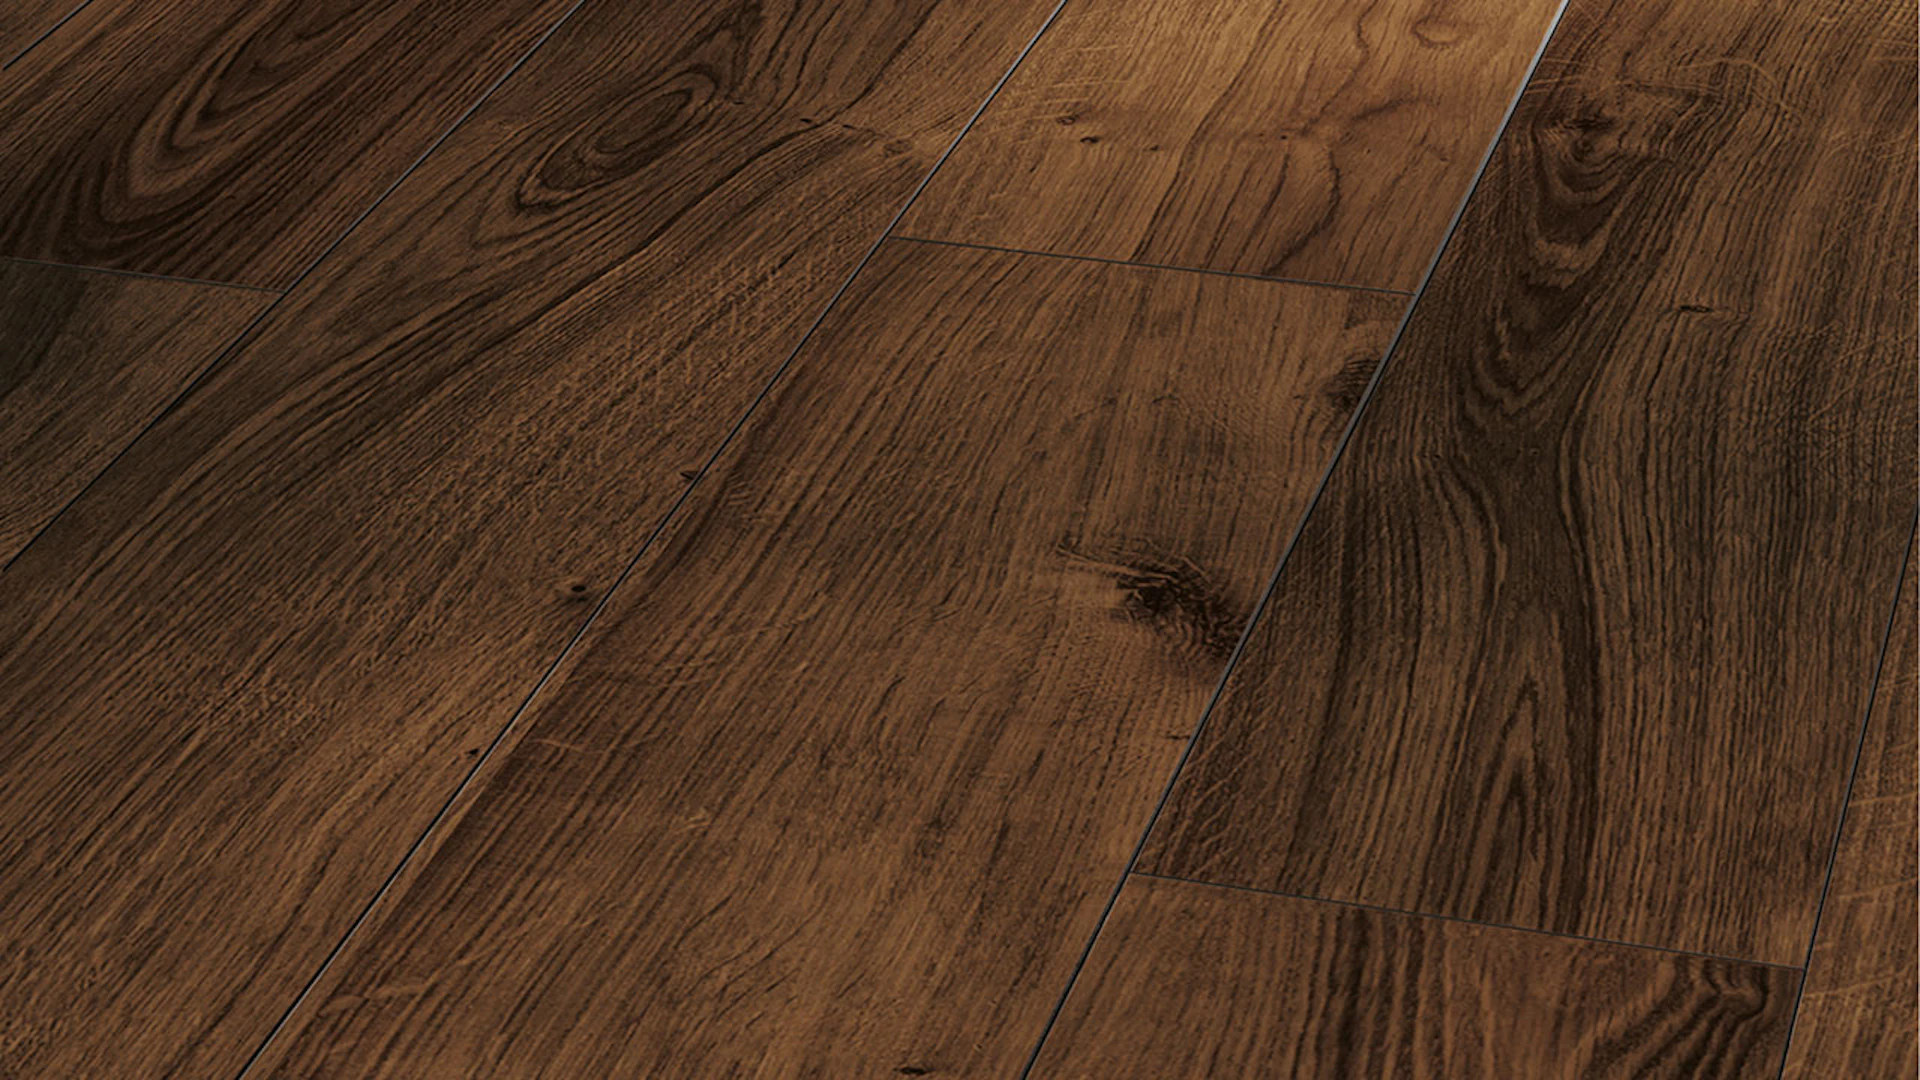 Parador Laminate Flooring Classic 1050 Smoked Oak Brushed Texture 4V-joint 1-plank wideplank